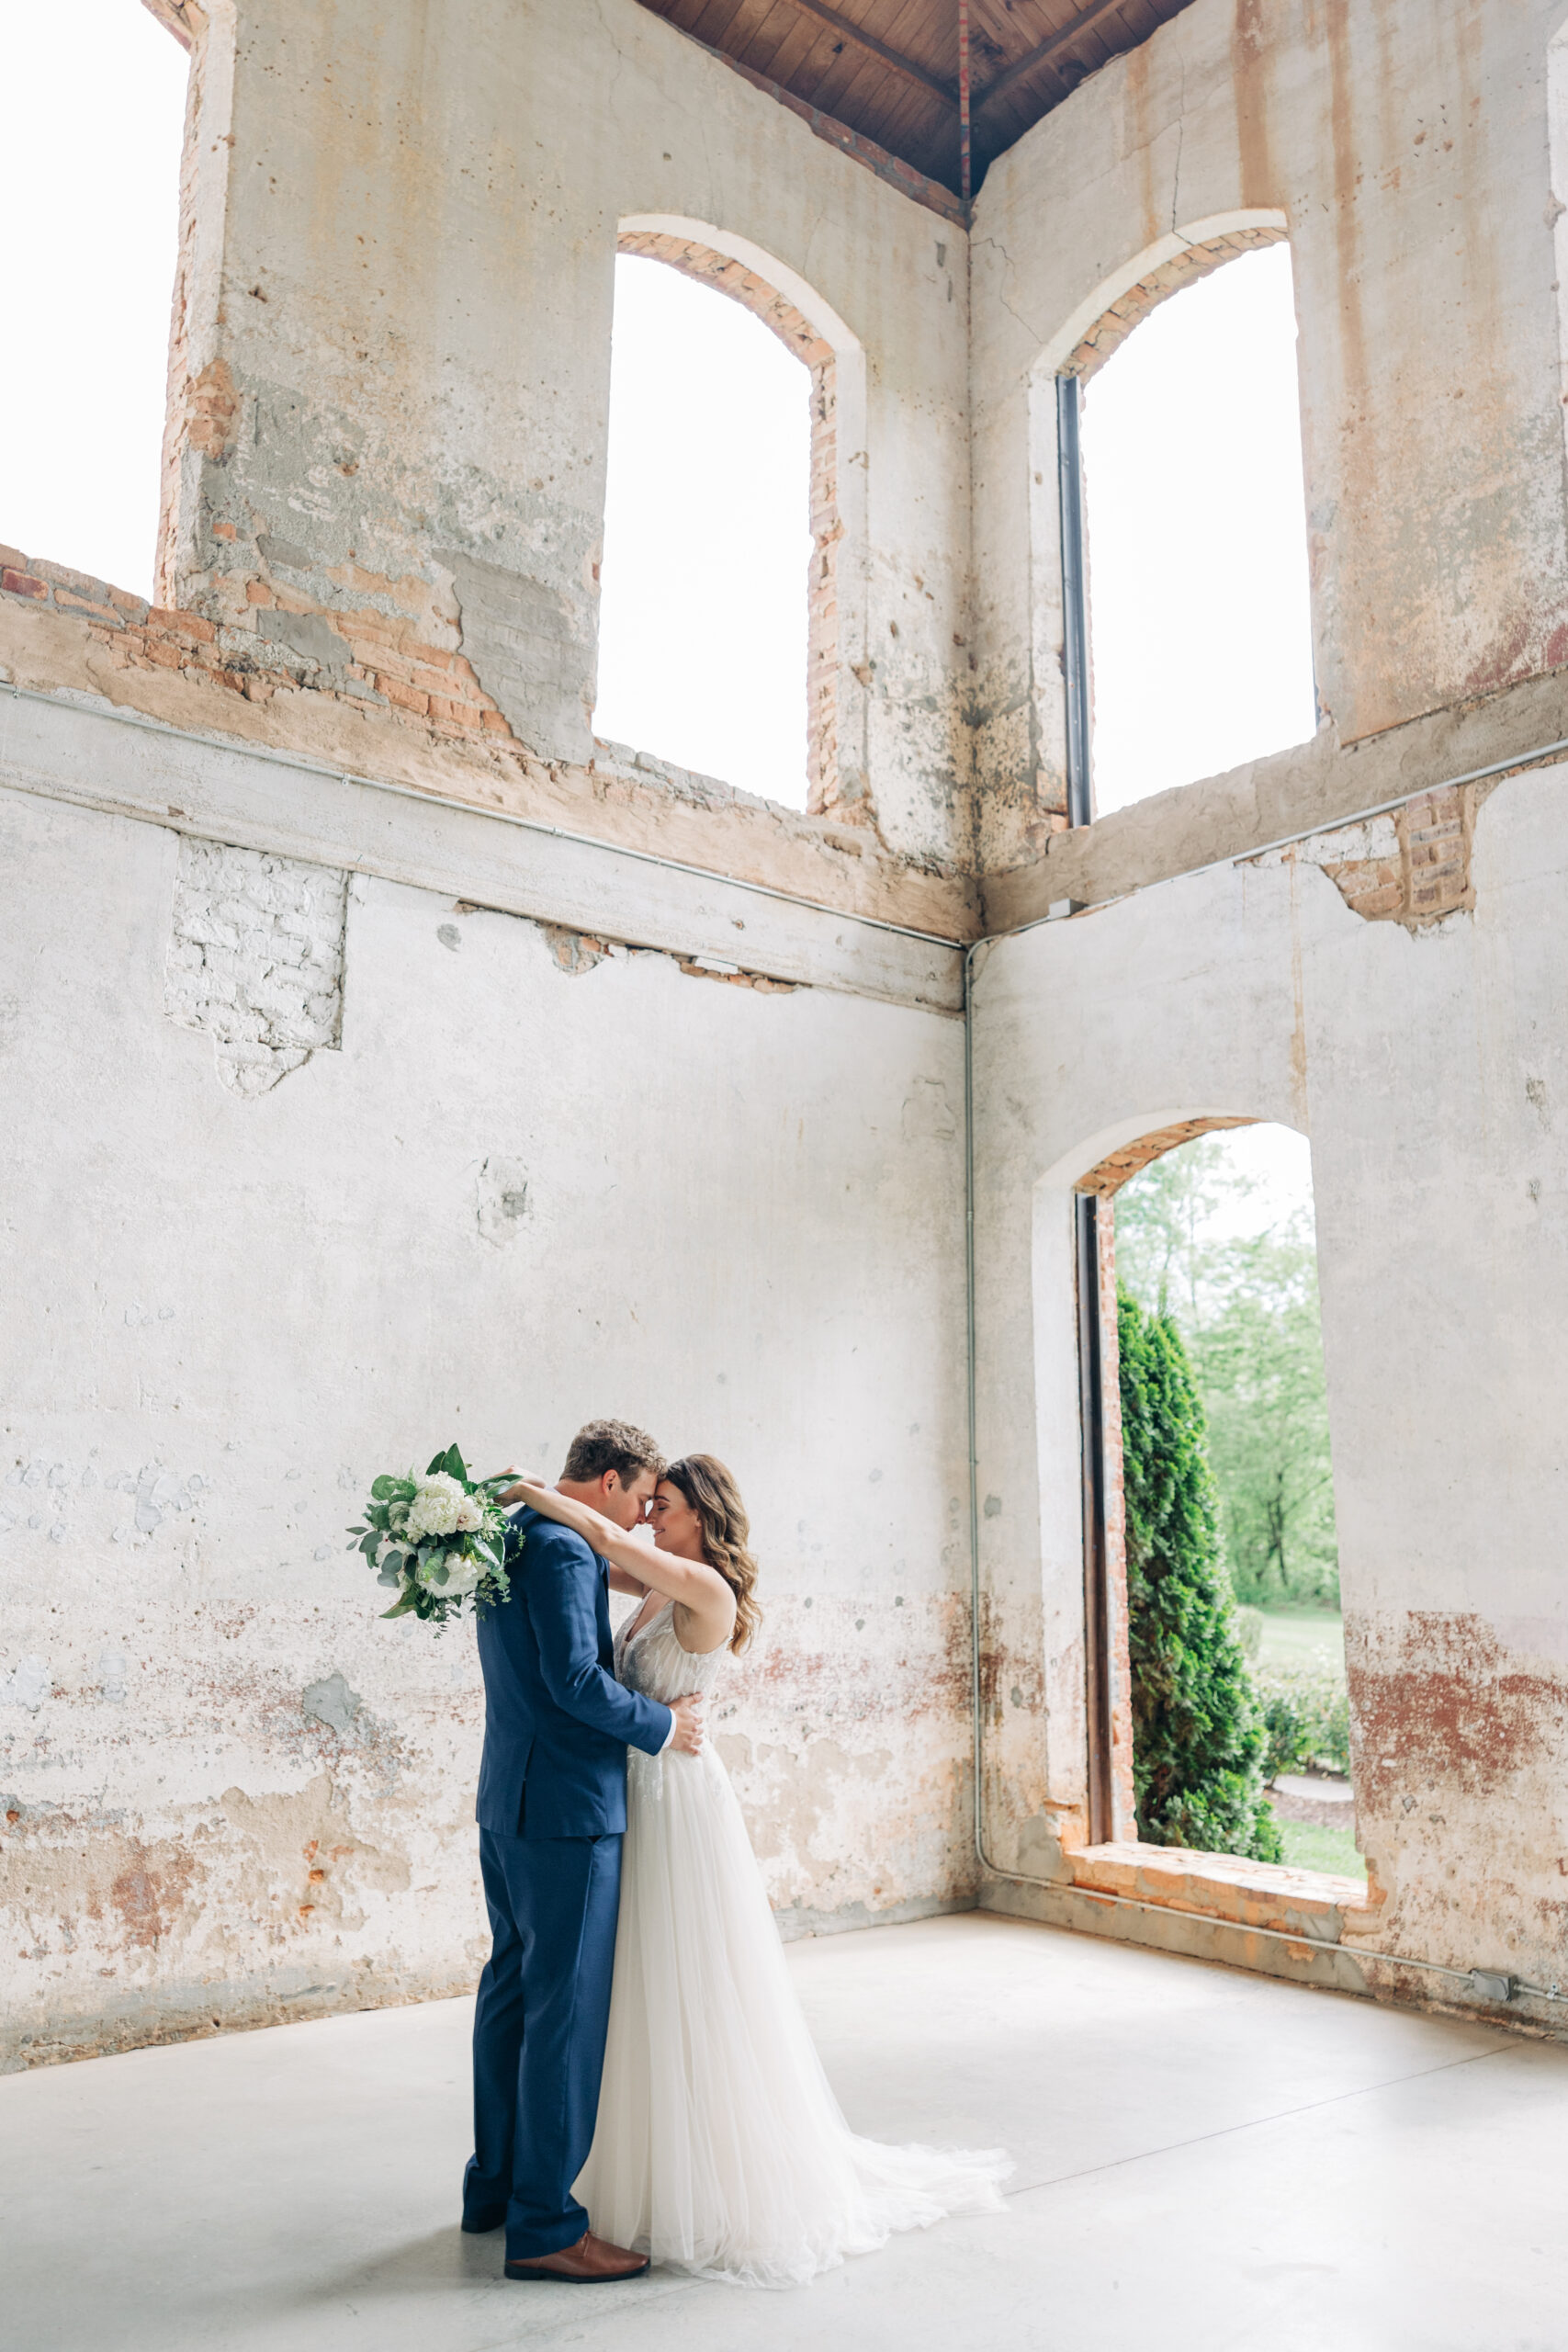 A groom in a blue suit dances closely with his bride in a rustic building